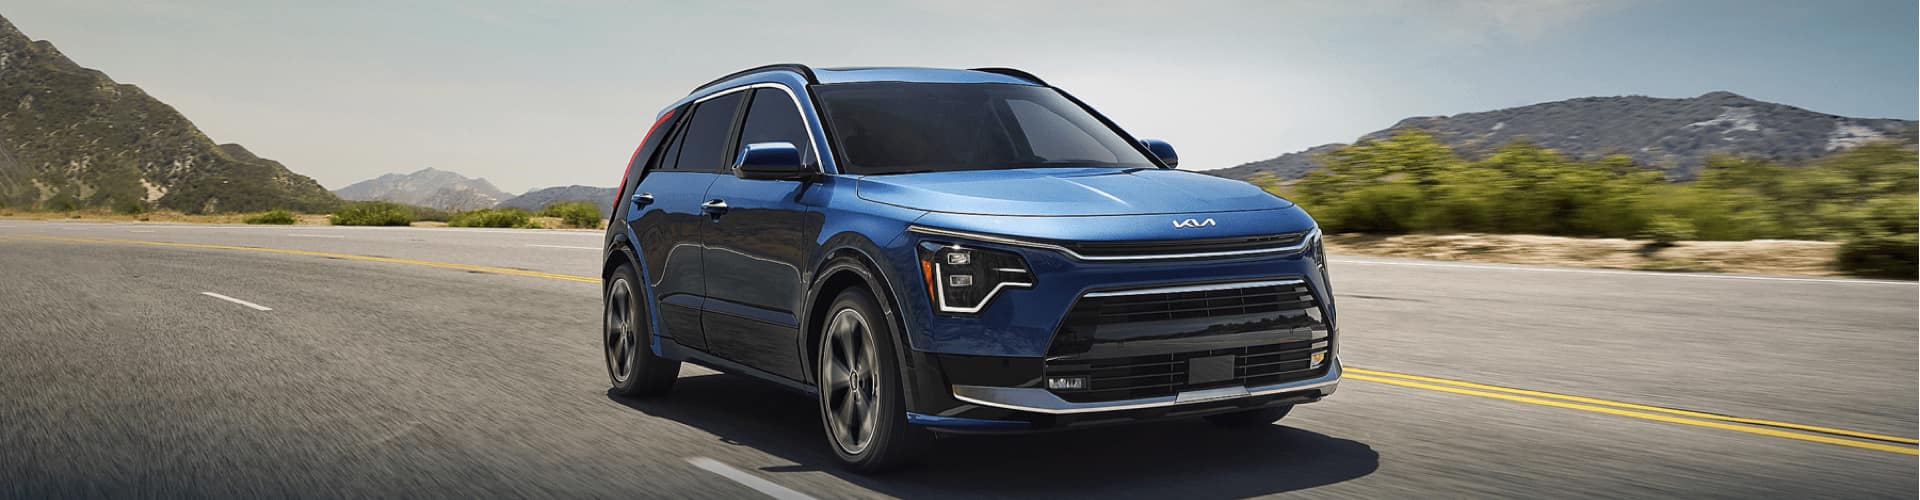 2023 Niro plug-in hybrid drives mountains in distance